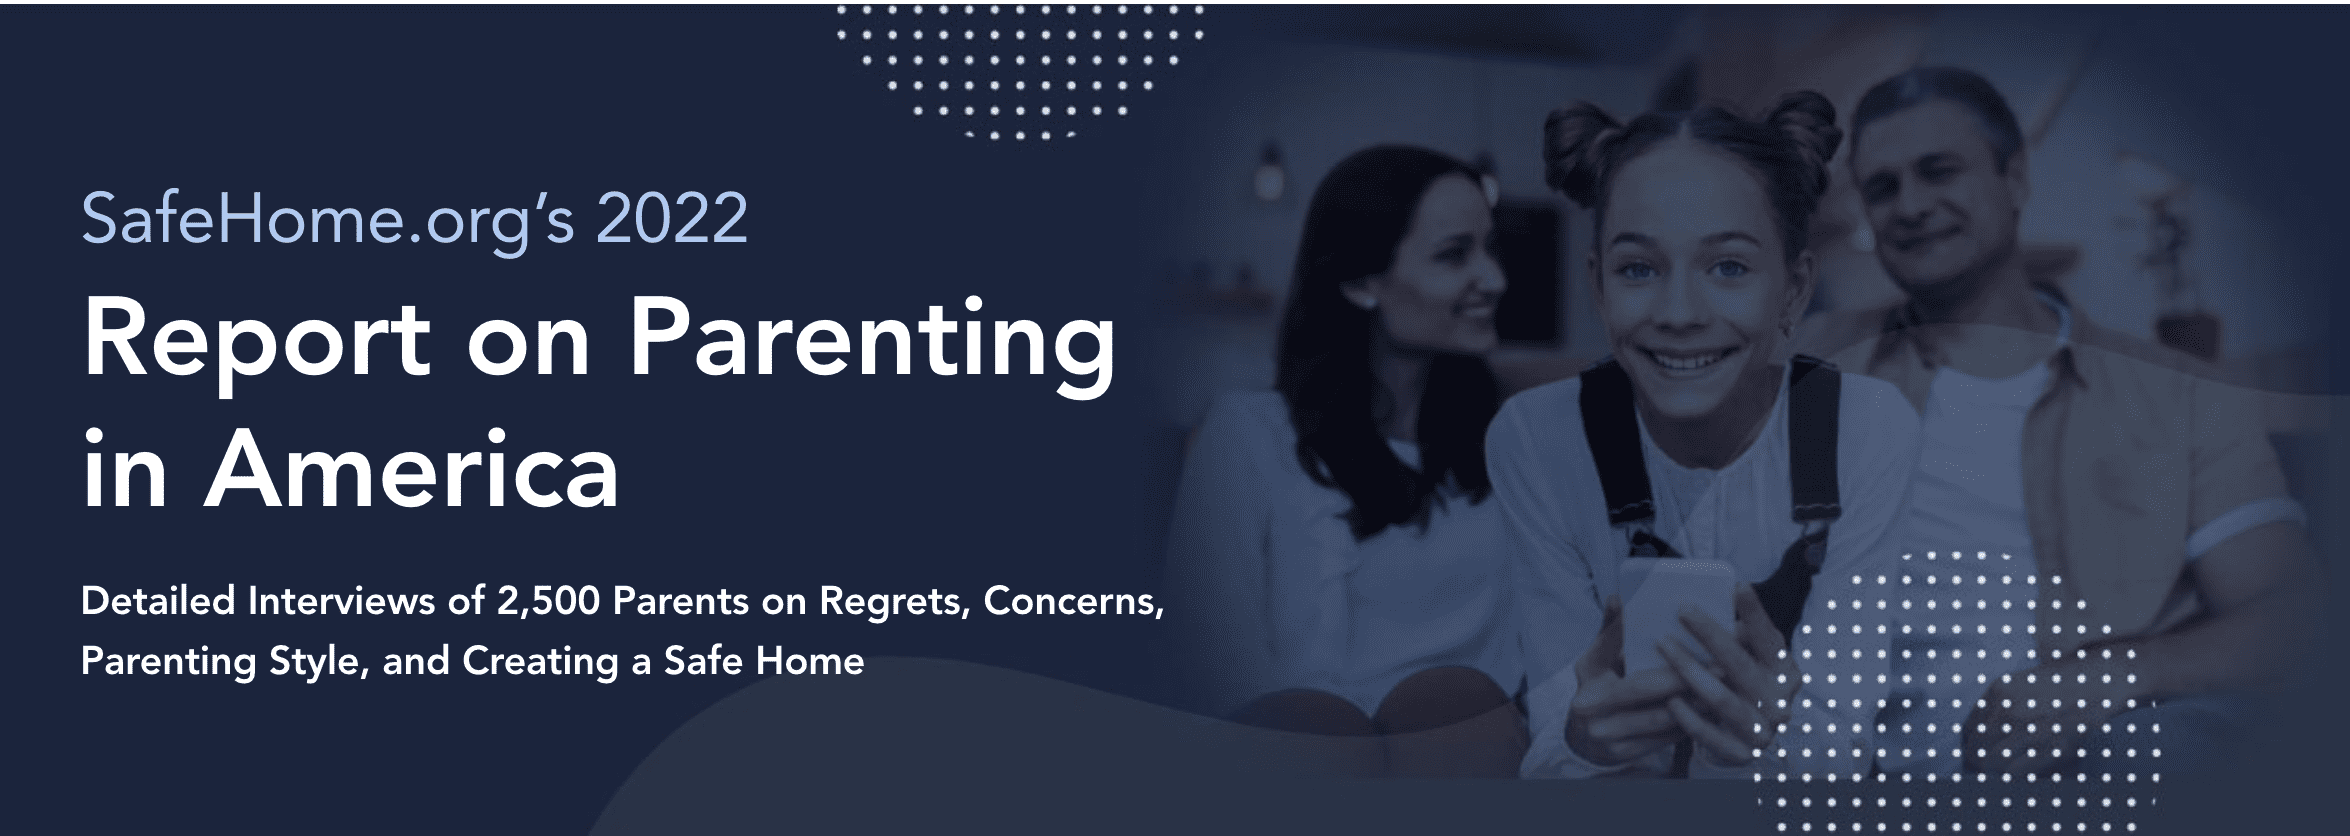 SafeHome.org’s 2022 Report on Parenting in America Featured Image